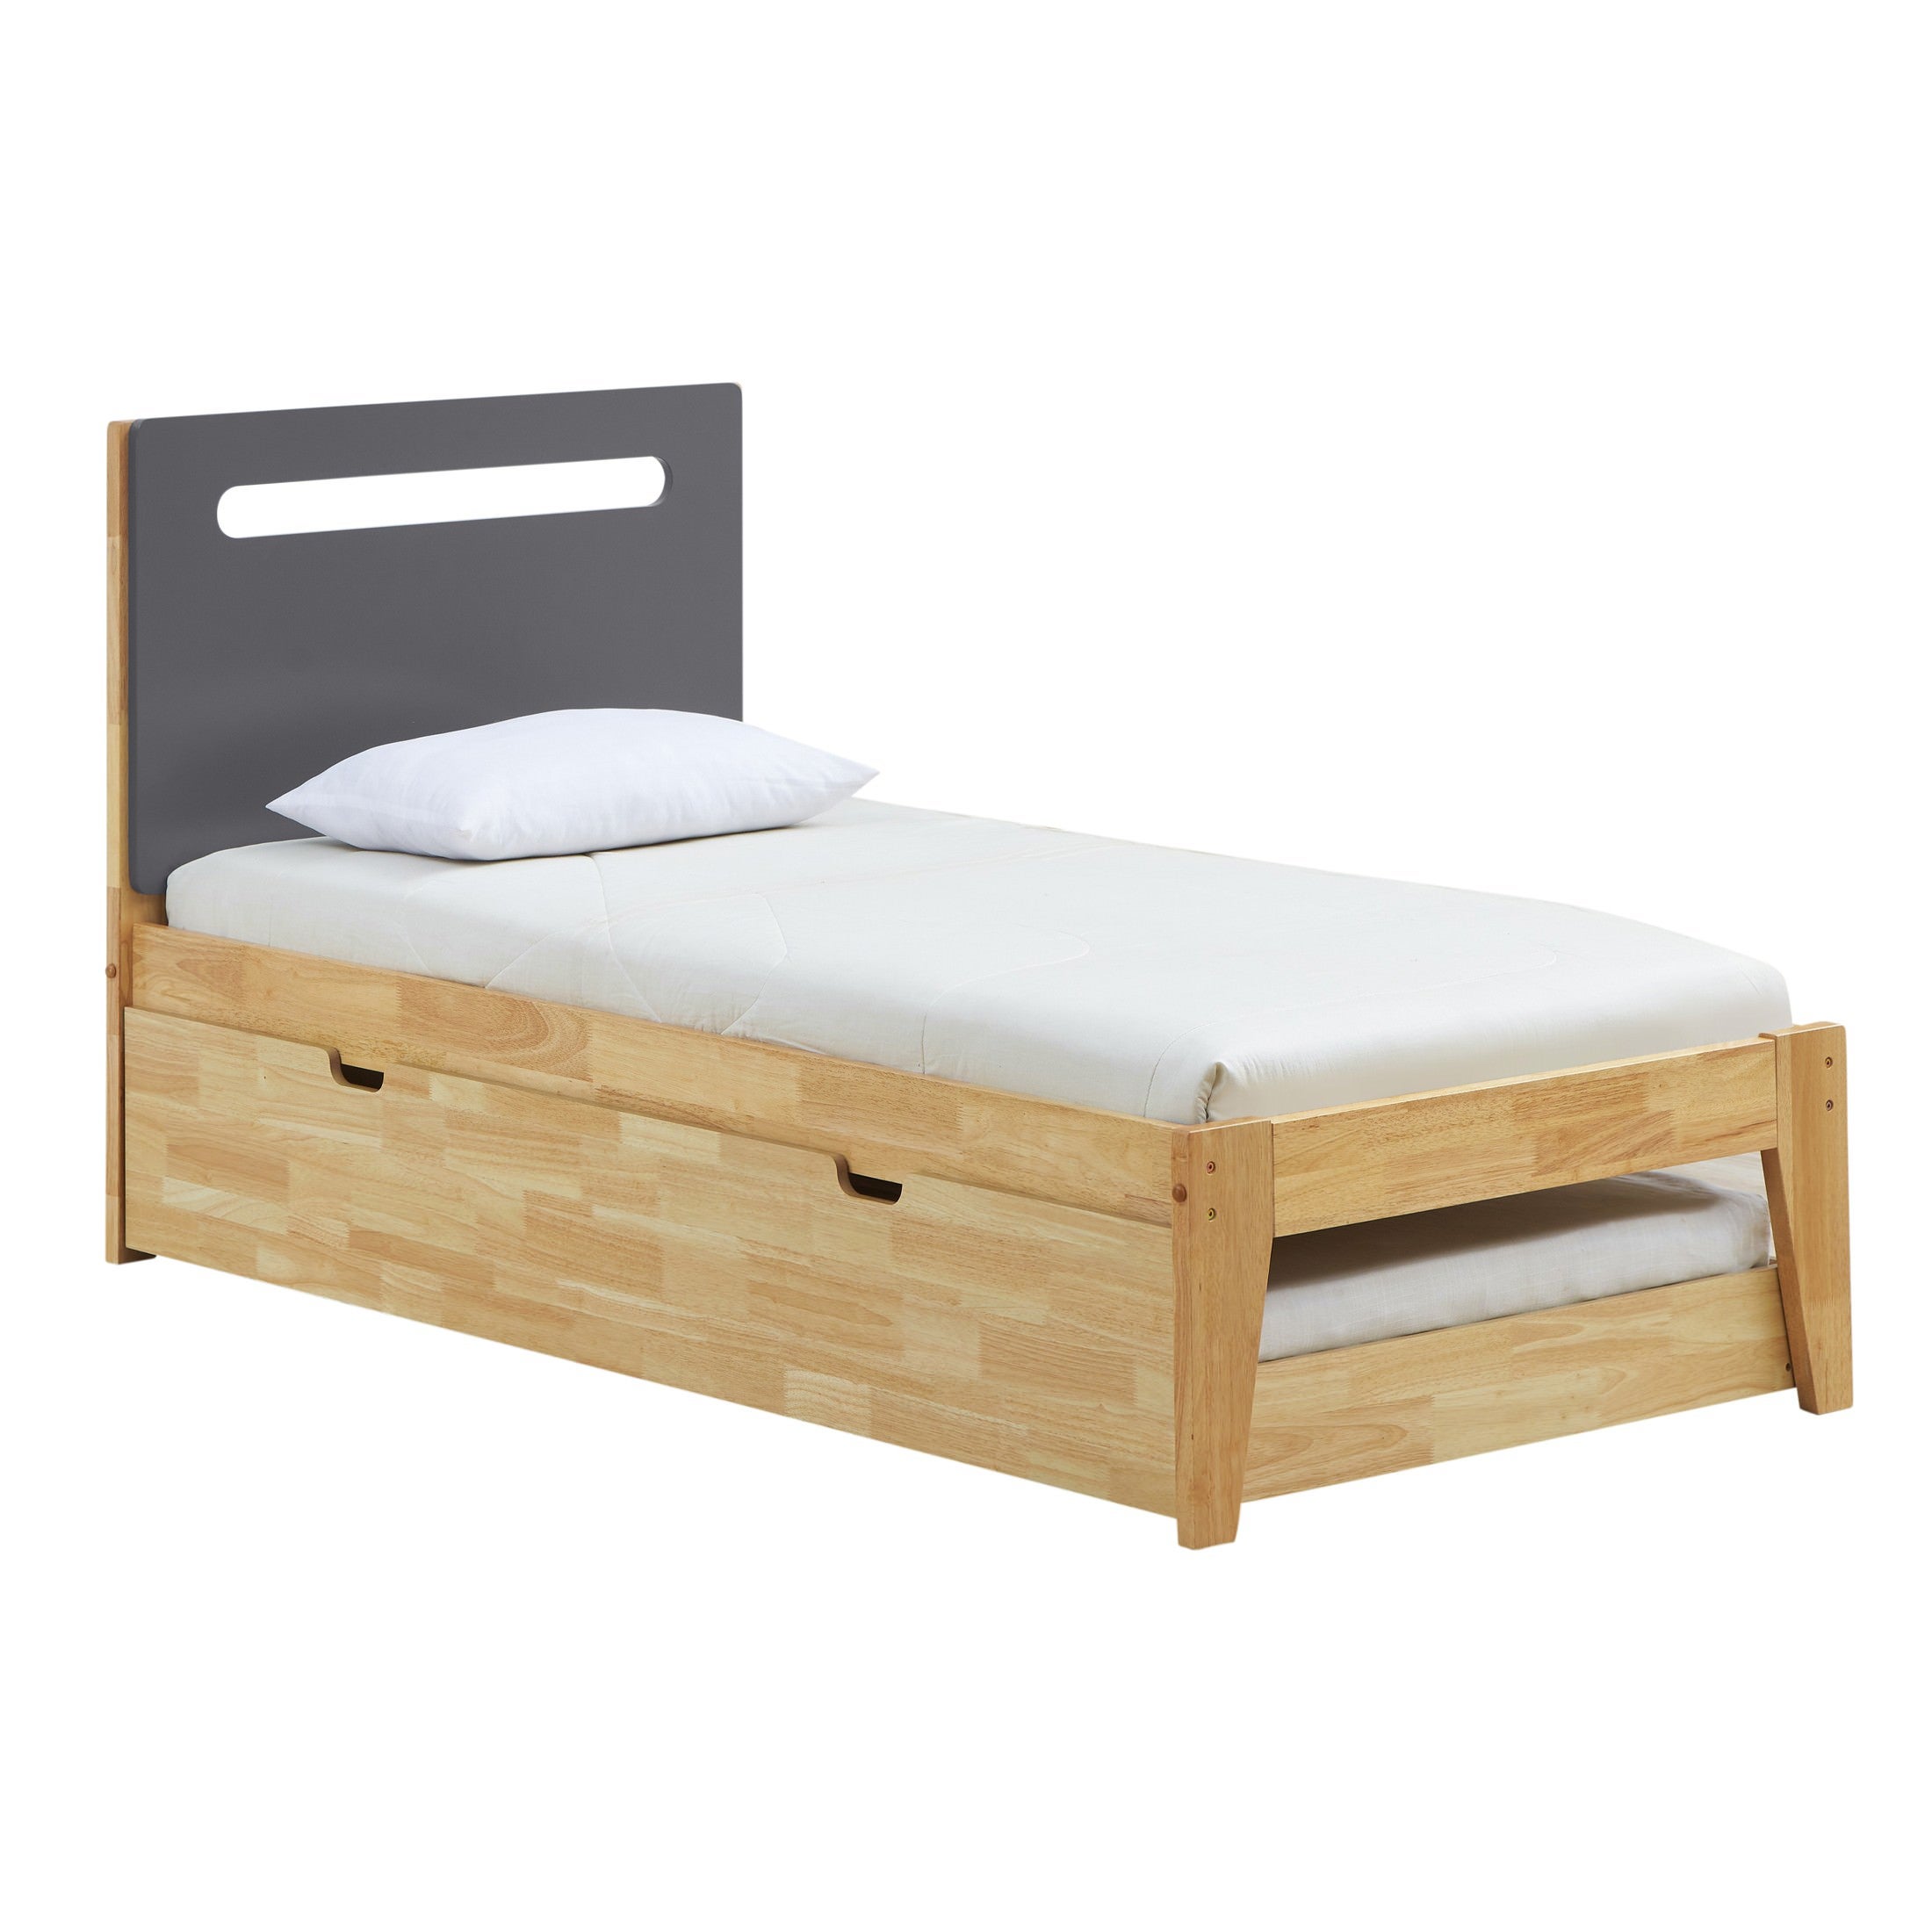 Casla Wooden Bed with Trundle, Single